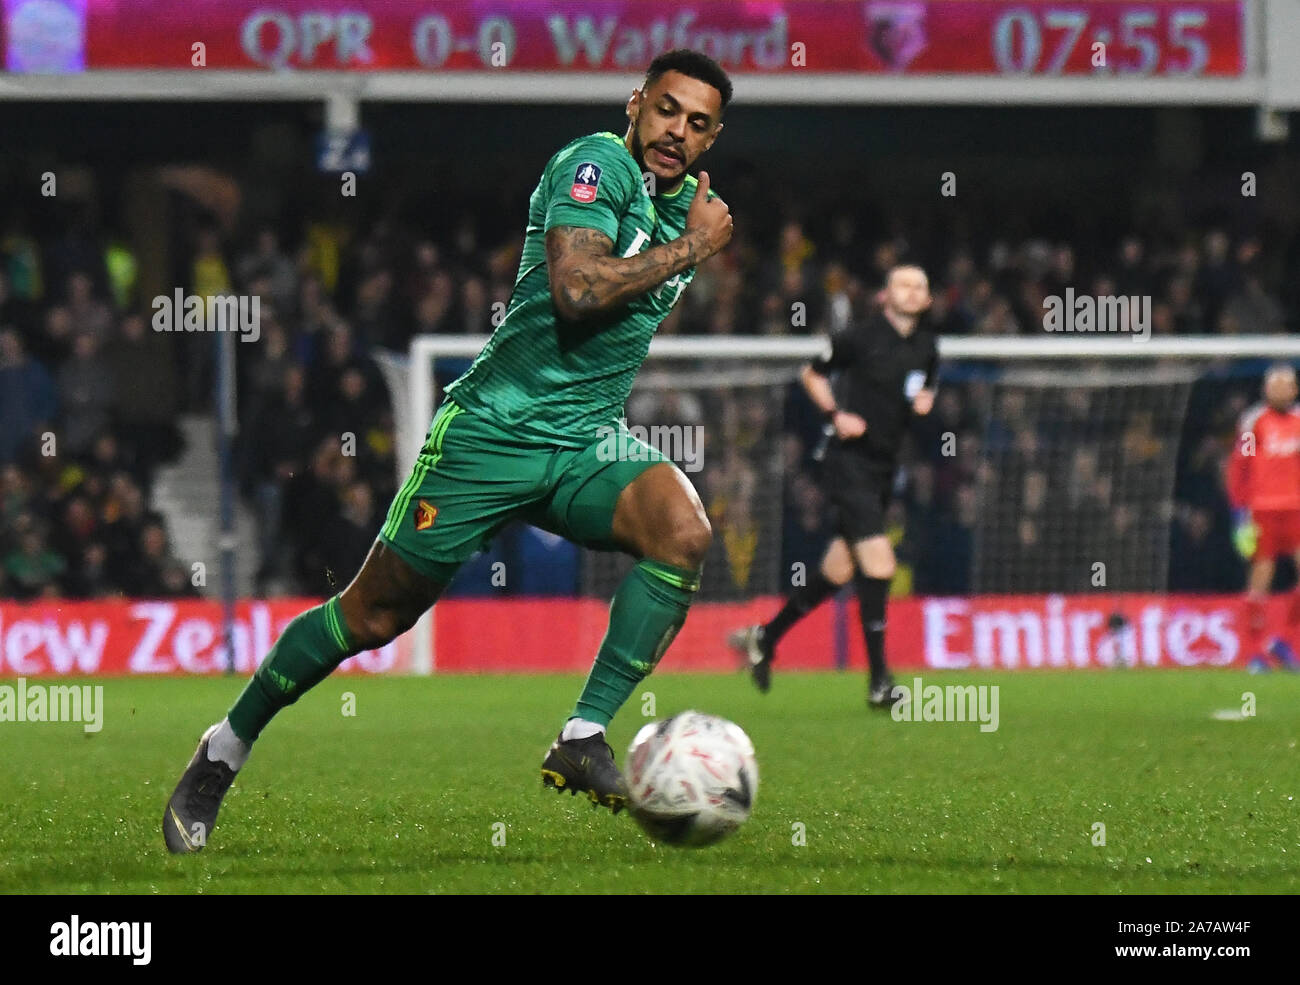 LONDON, ENGLAND - FEBRUARY 15, 2019: Andre Gray of Watford pictured during the 2018/19 FA Cup Fifth Round game between Queens Park Rangers FC and Watford FC at Loftus Road Stadium. Stock Photo